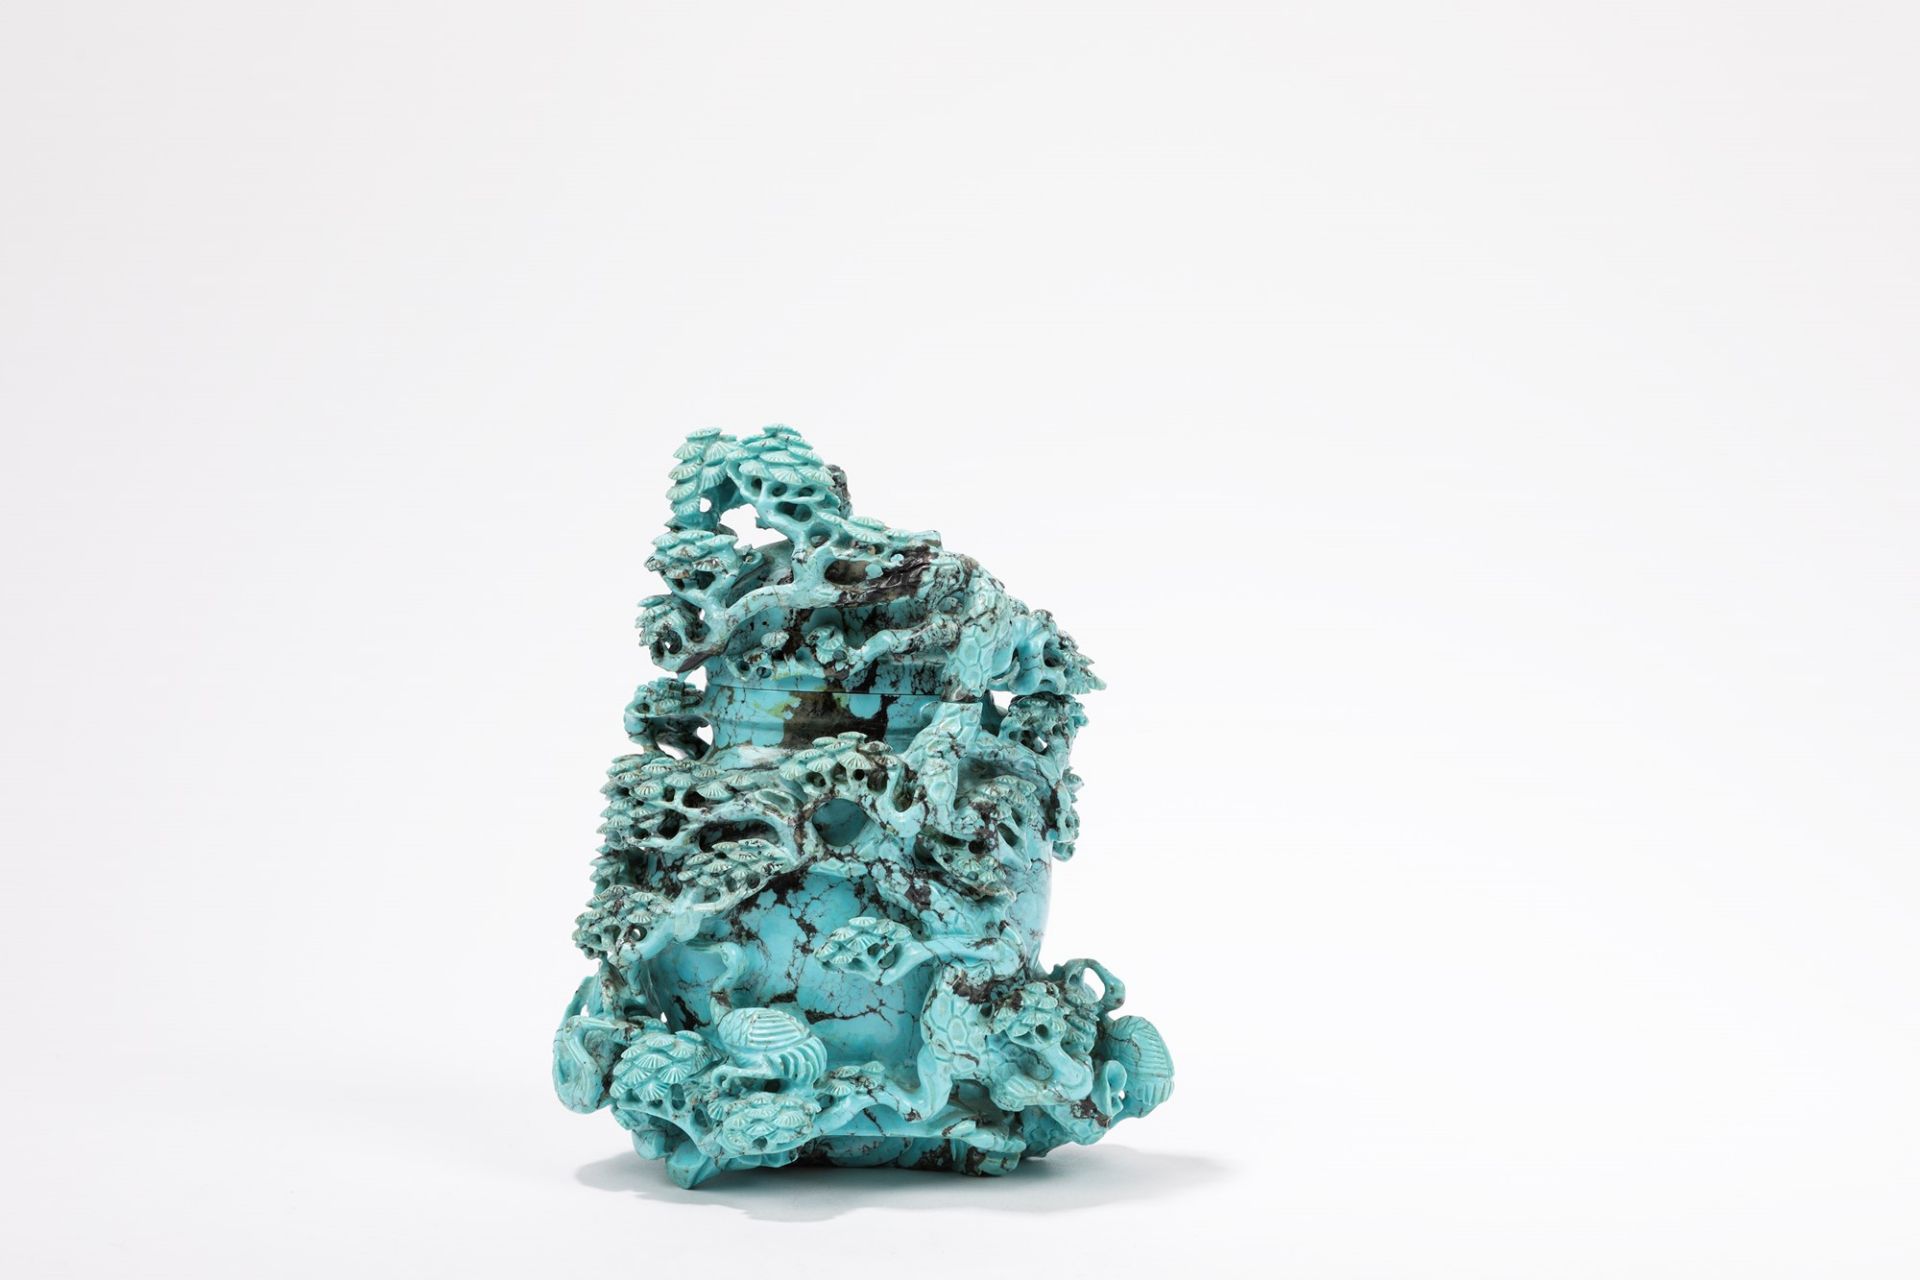 A TURQUOISE CARVED VASE, China, 20th century - Image 2 of 3